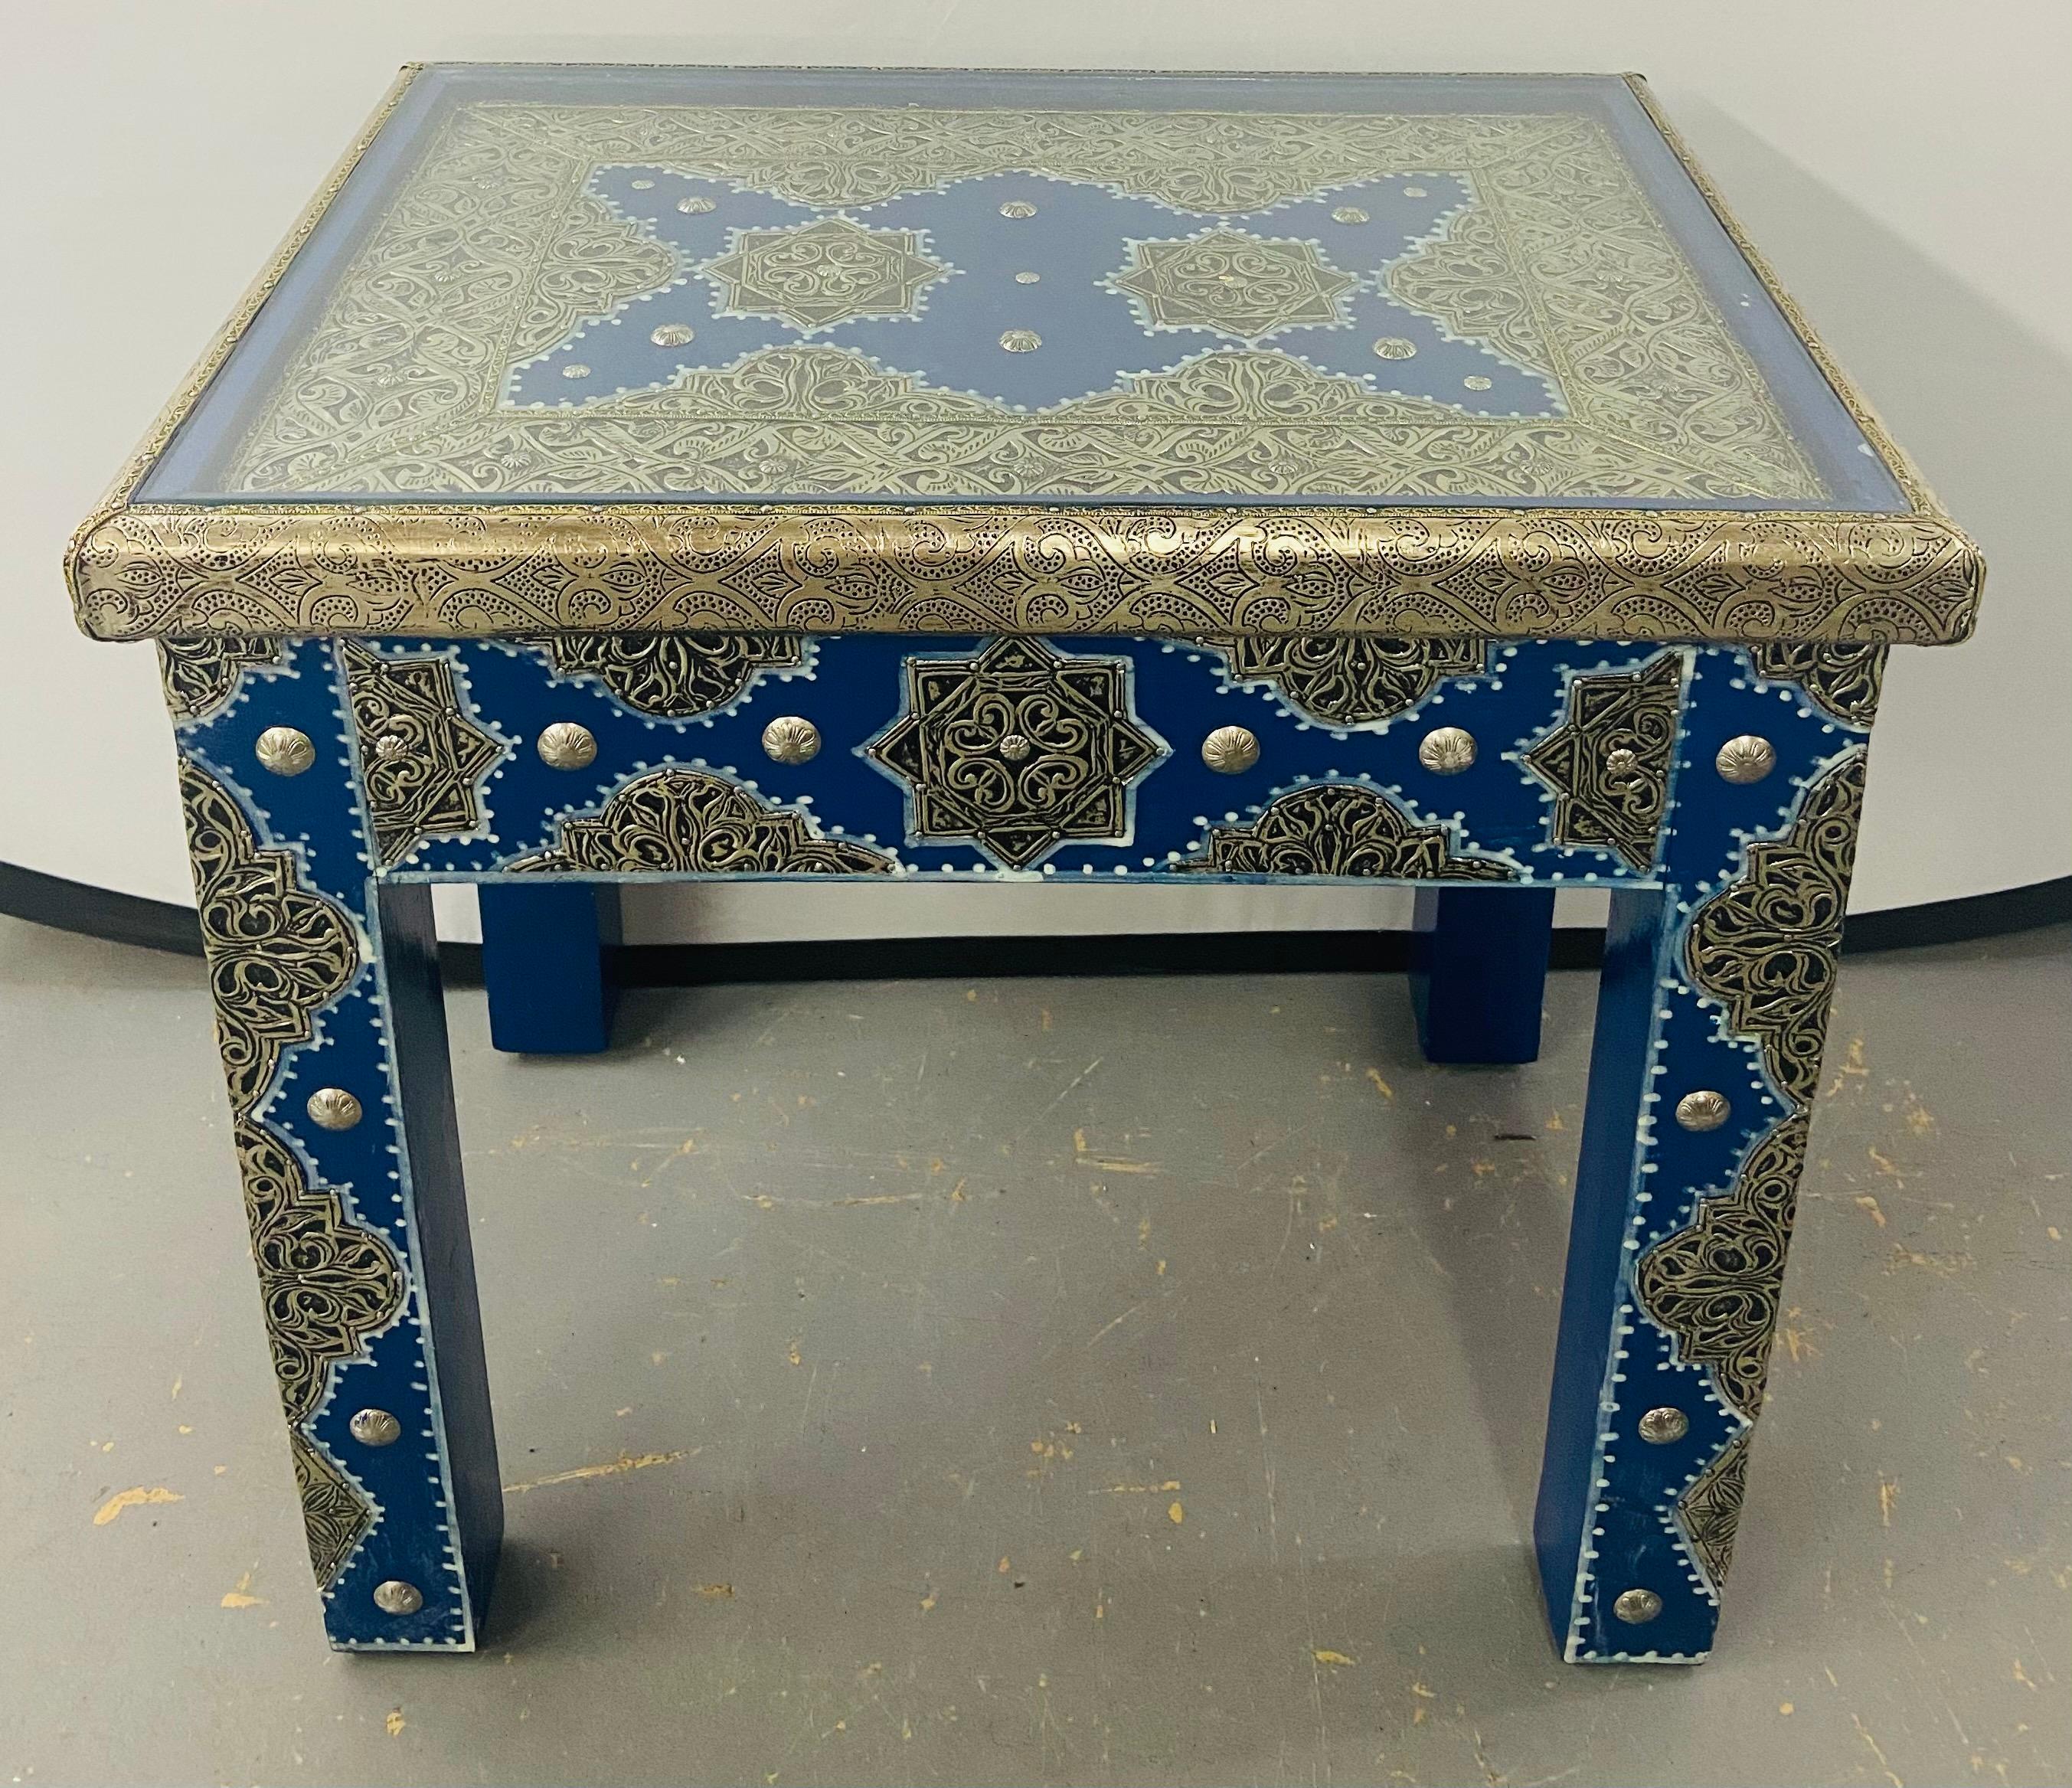 An exceptional pair of Hollywood Regency style Moroccan white brass inlaid wood end or side tables in blue Majorelle. Designed by master artisans, handcrafted using fine white brass and hand painted in blue Majorelle inspired by the legendary Yves